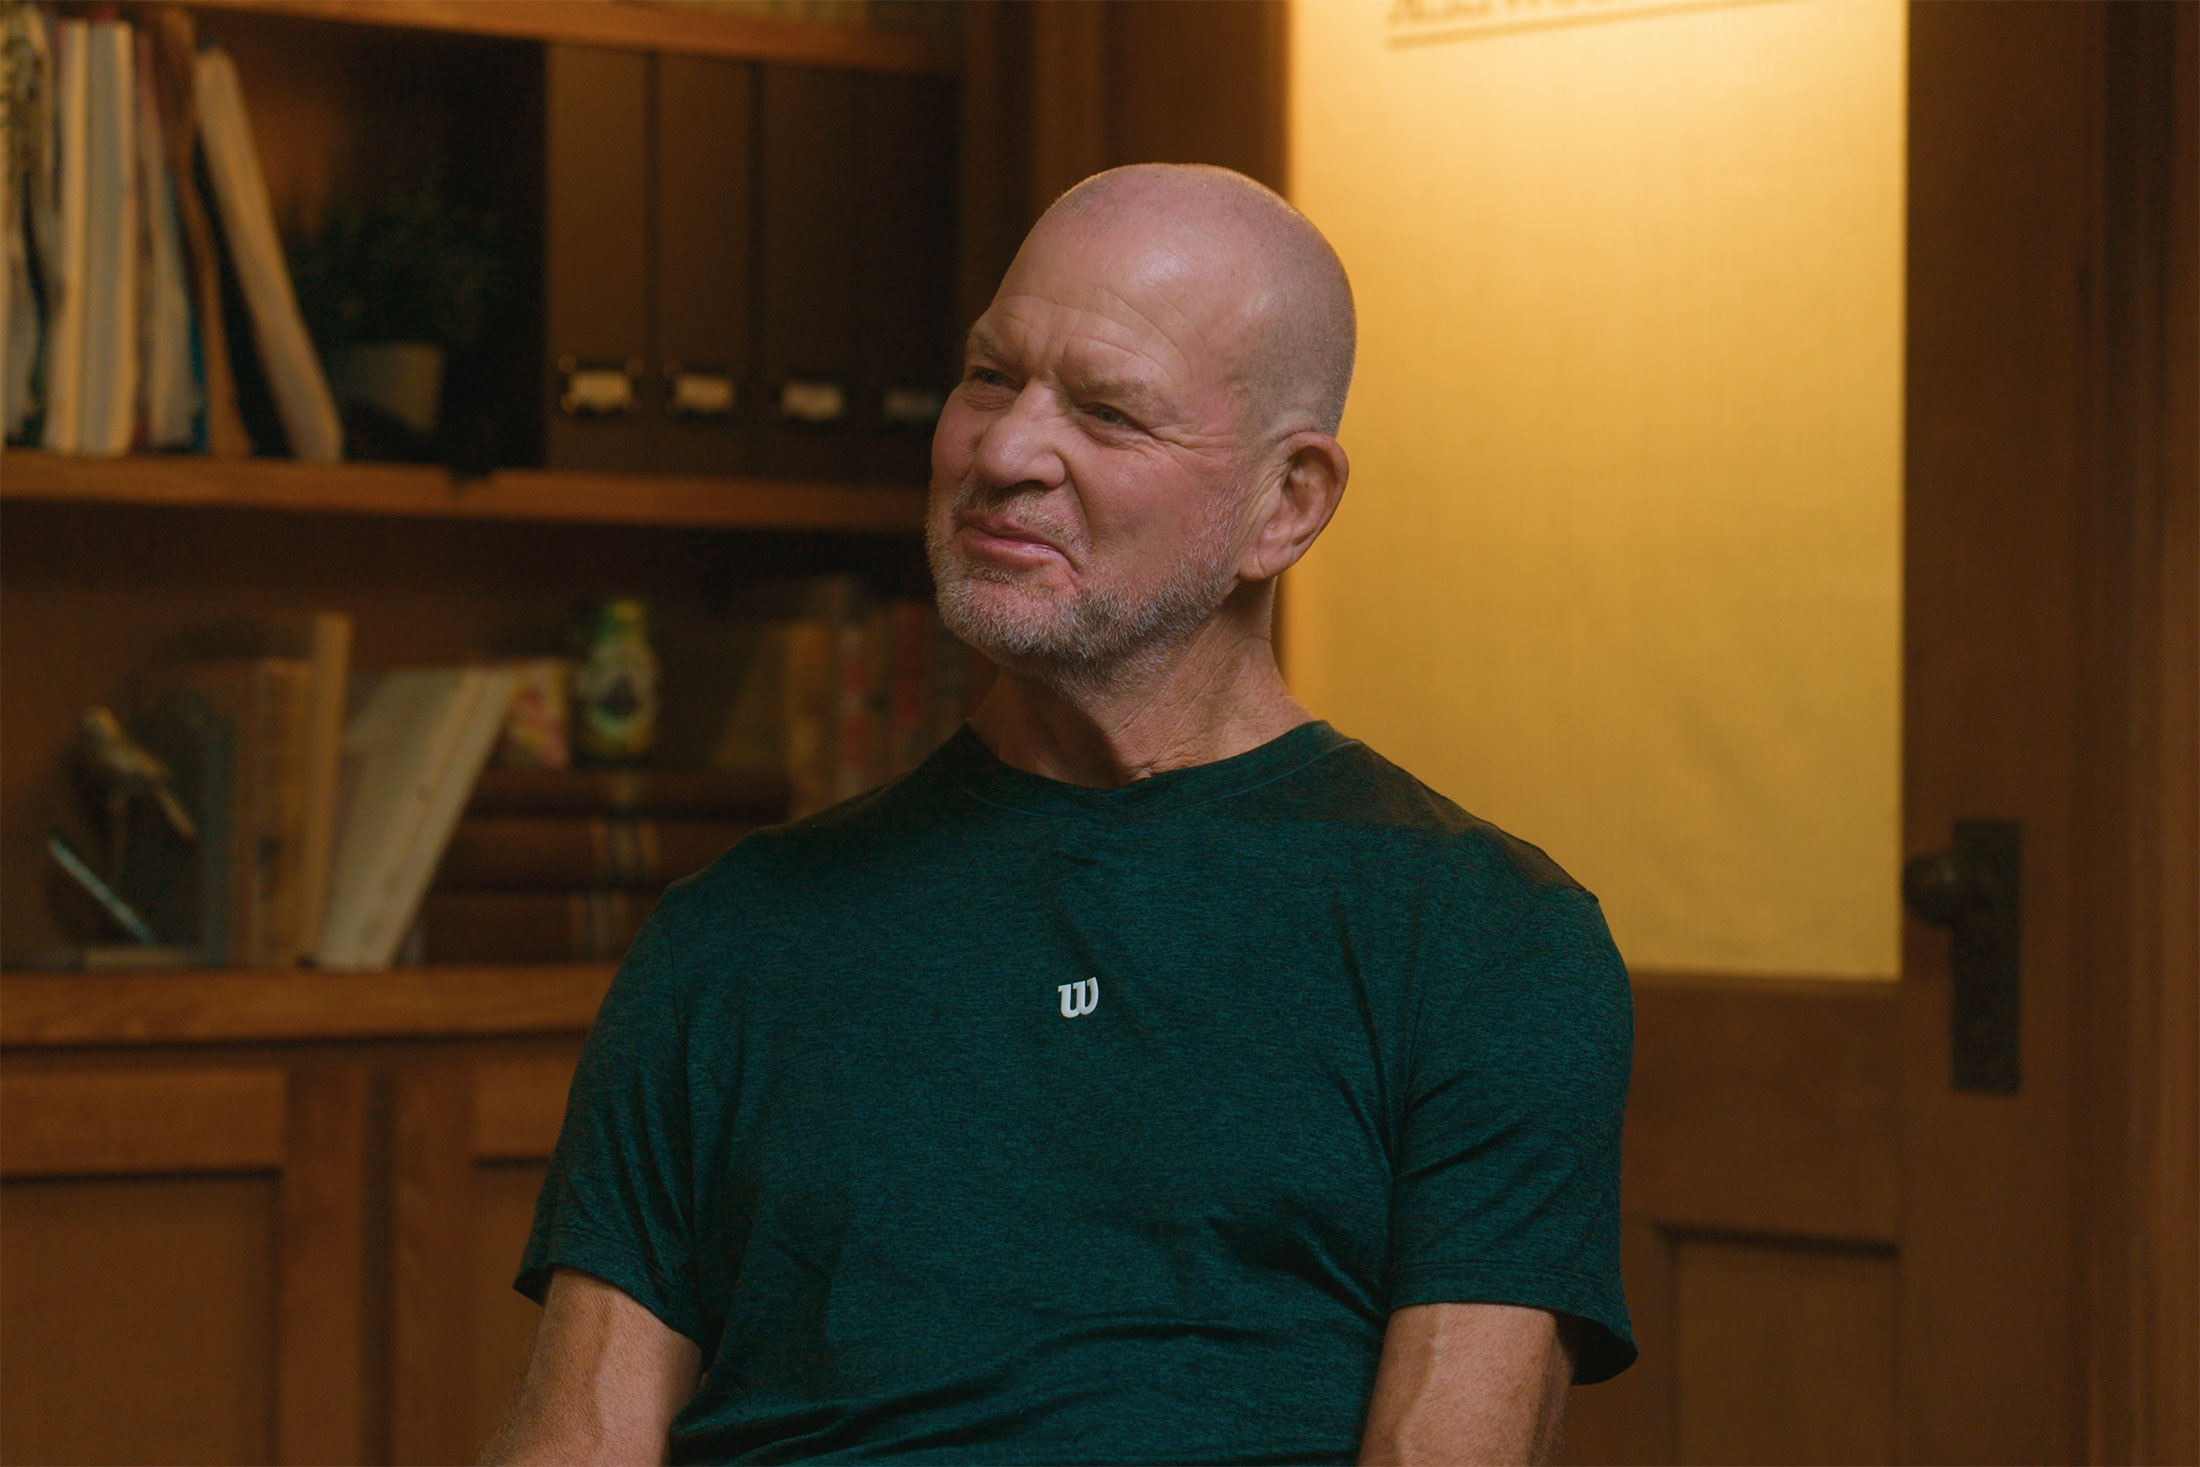 Lululemon founder Chip Wilson starting new venture to find cure